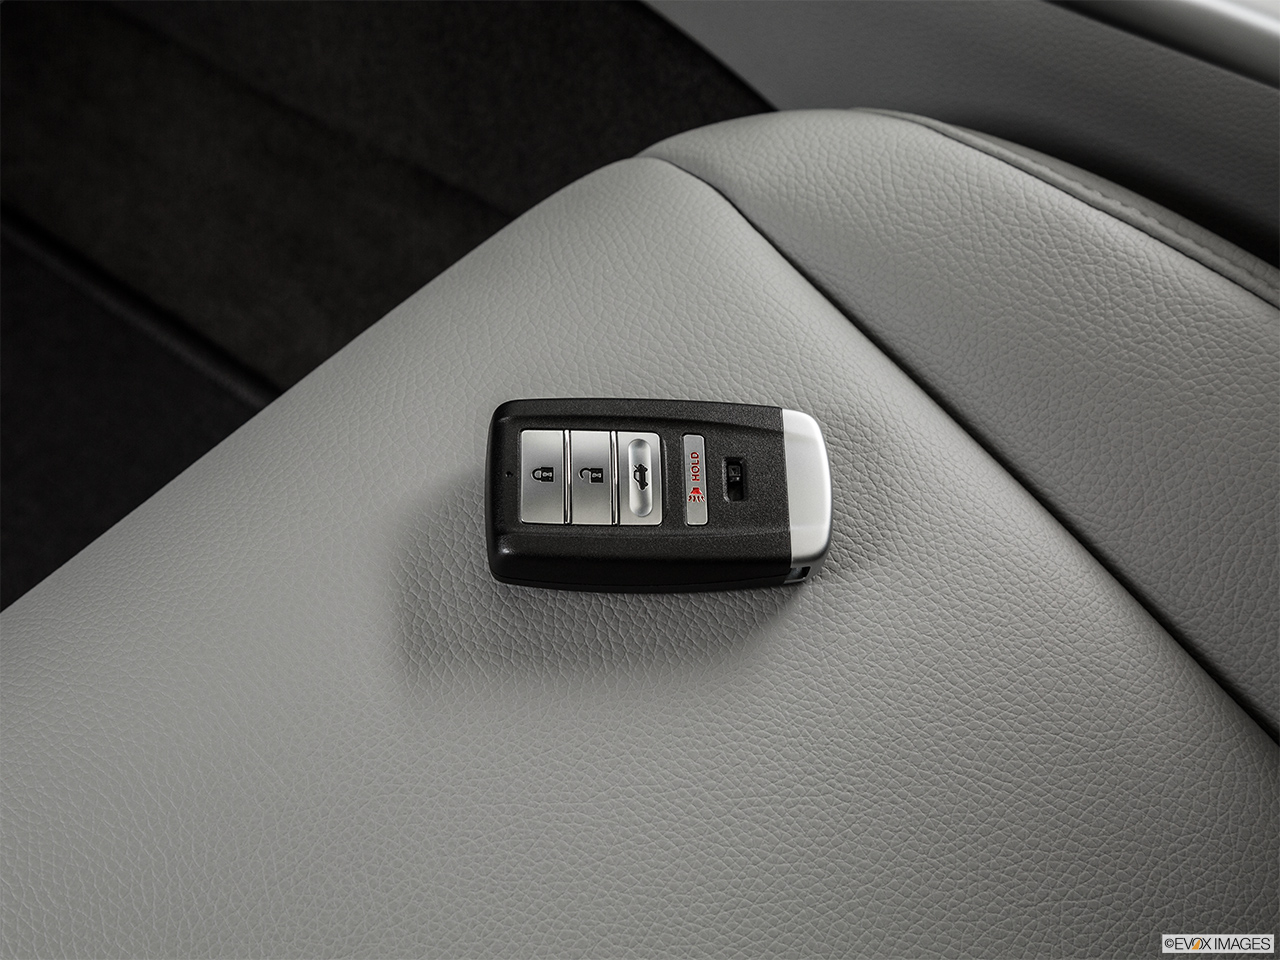 2015 Acura TLX 3.5 V-6 9-AT P-AWS Key fob on driver's seat. 